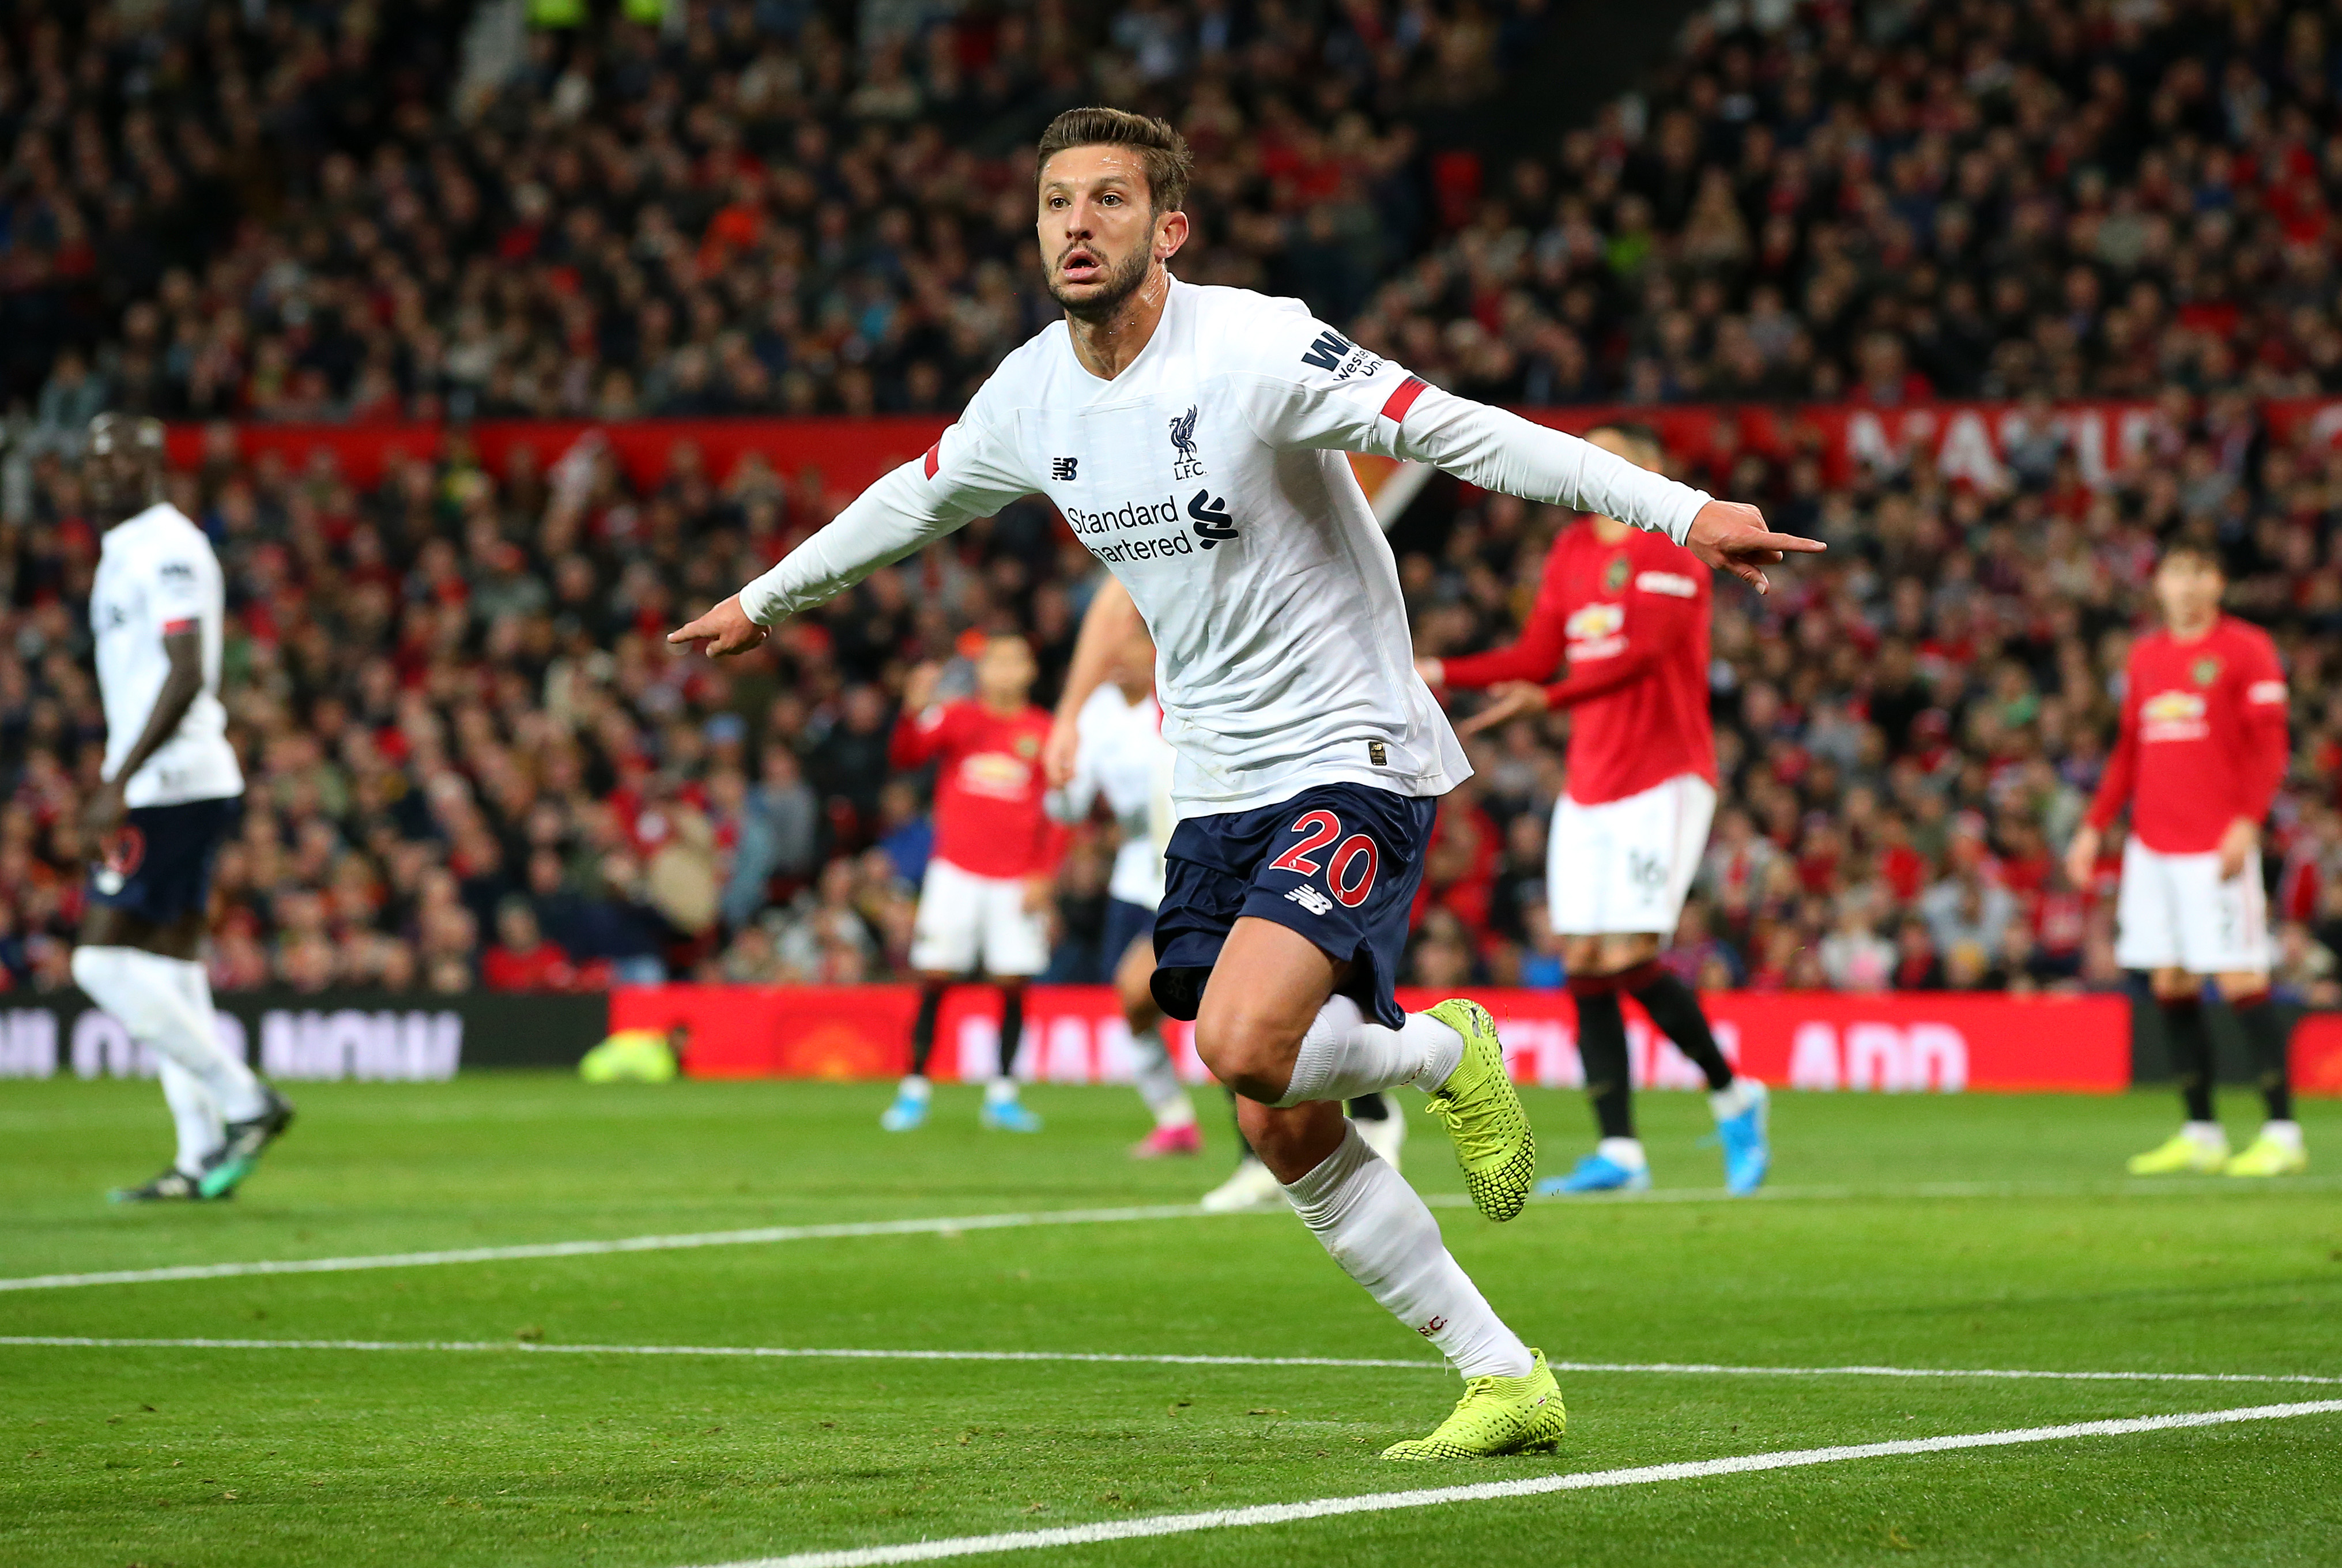 MANCHESTER, ENGLAND - OCTOBER 20:  Adam Lallana of Liverpool celebrates after scoring his sides first goal during the Premier League match between Manchester United and Liverpool FC at Old Trafford on October 20, 2019 in Manchester, United Kingdom. (Photo by Alex Livesey/Getty Images)